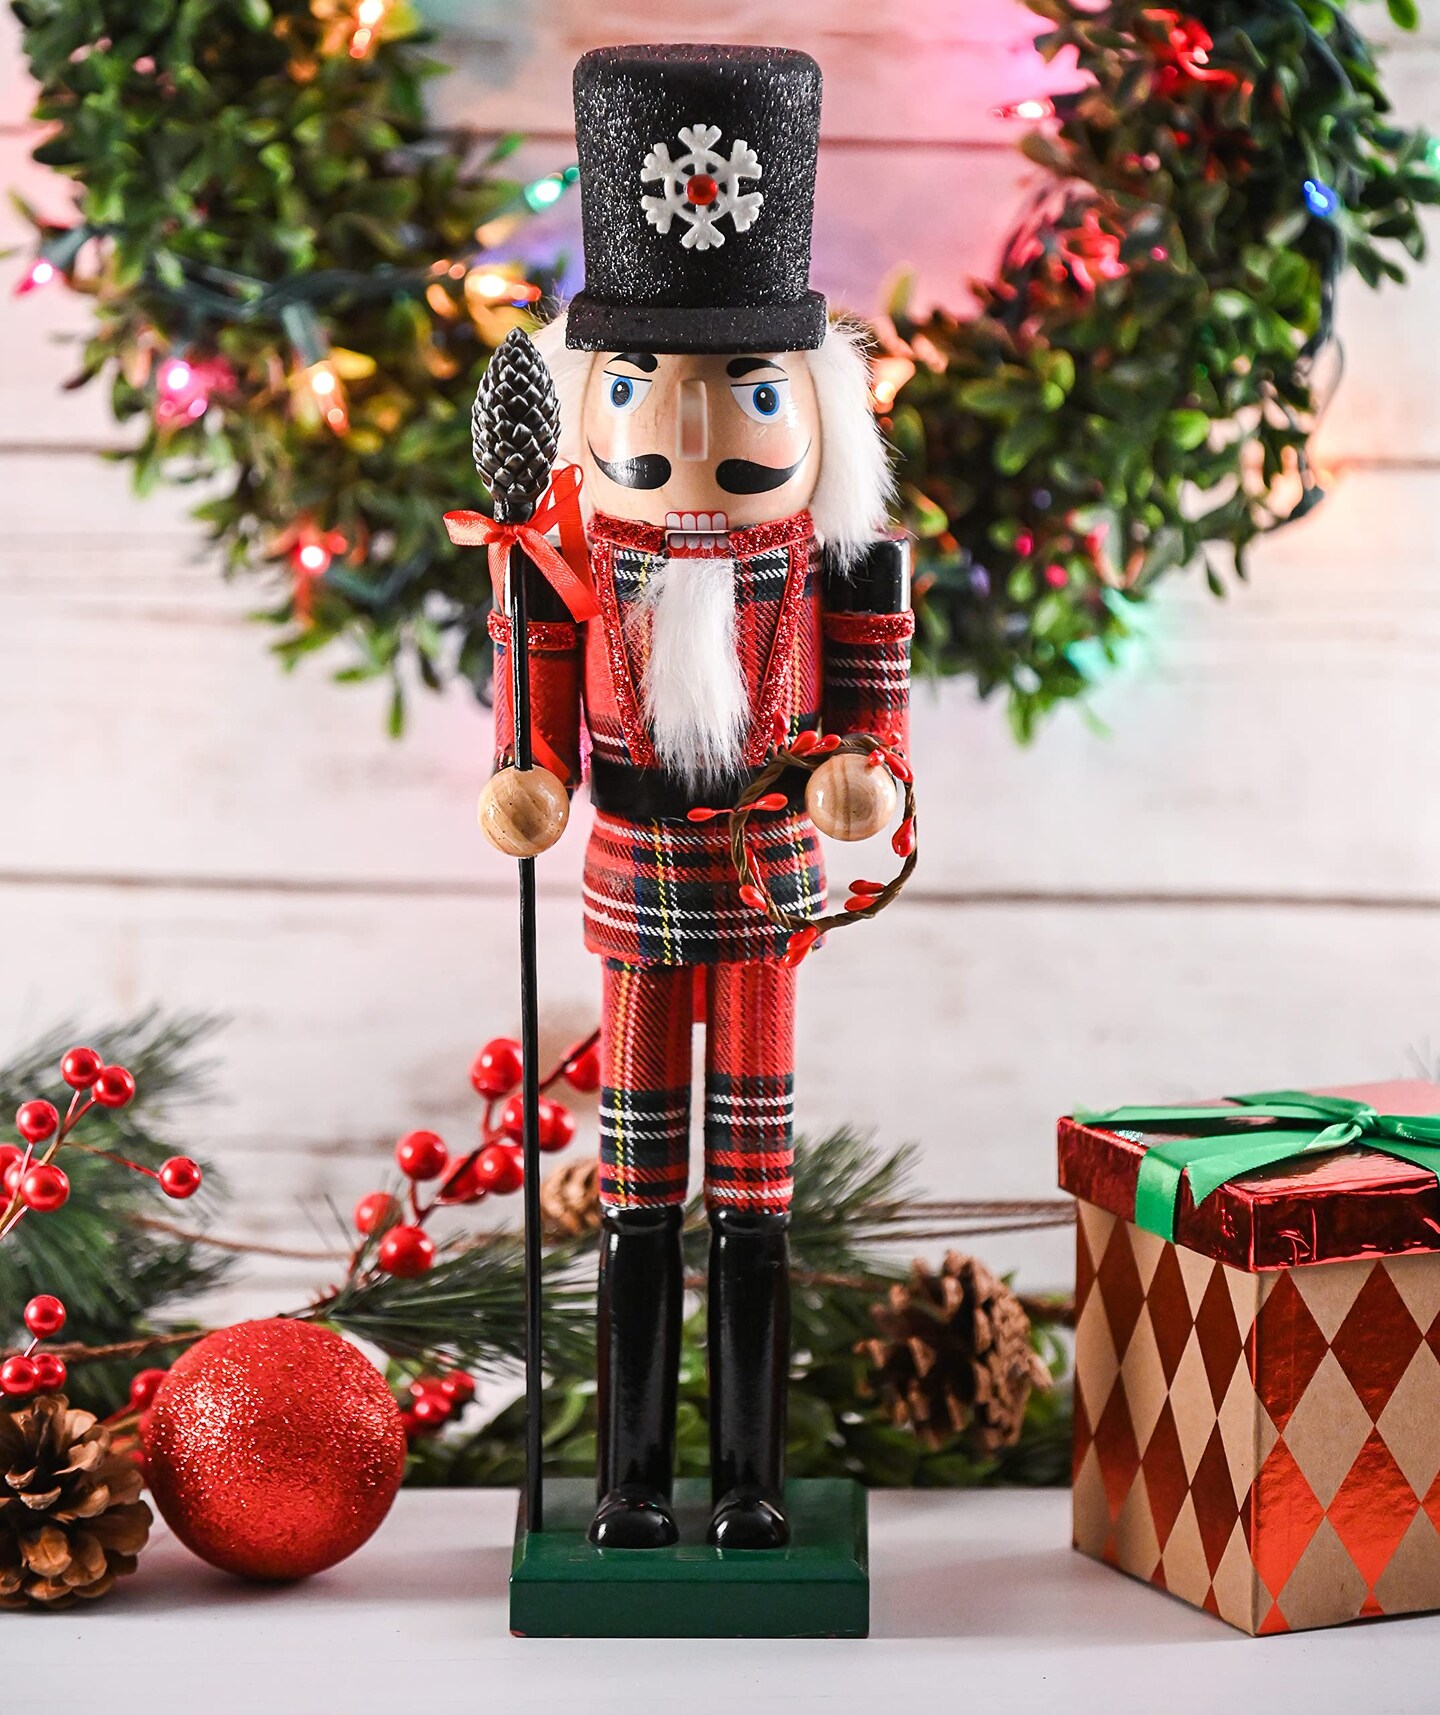 Ornativity Christmas Buffalo Plaid Nutcracker &#x2013; Red and Black Wooden Nutcracker Soldier with an Acorn Staff and Holly Berries Wreath Xmas Themed Holiday Nut Cracker Doll Figure Decorations